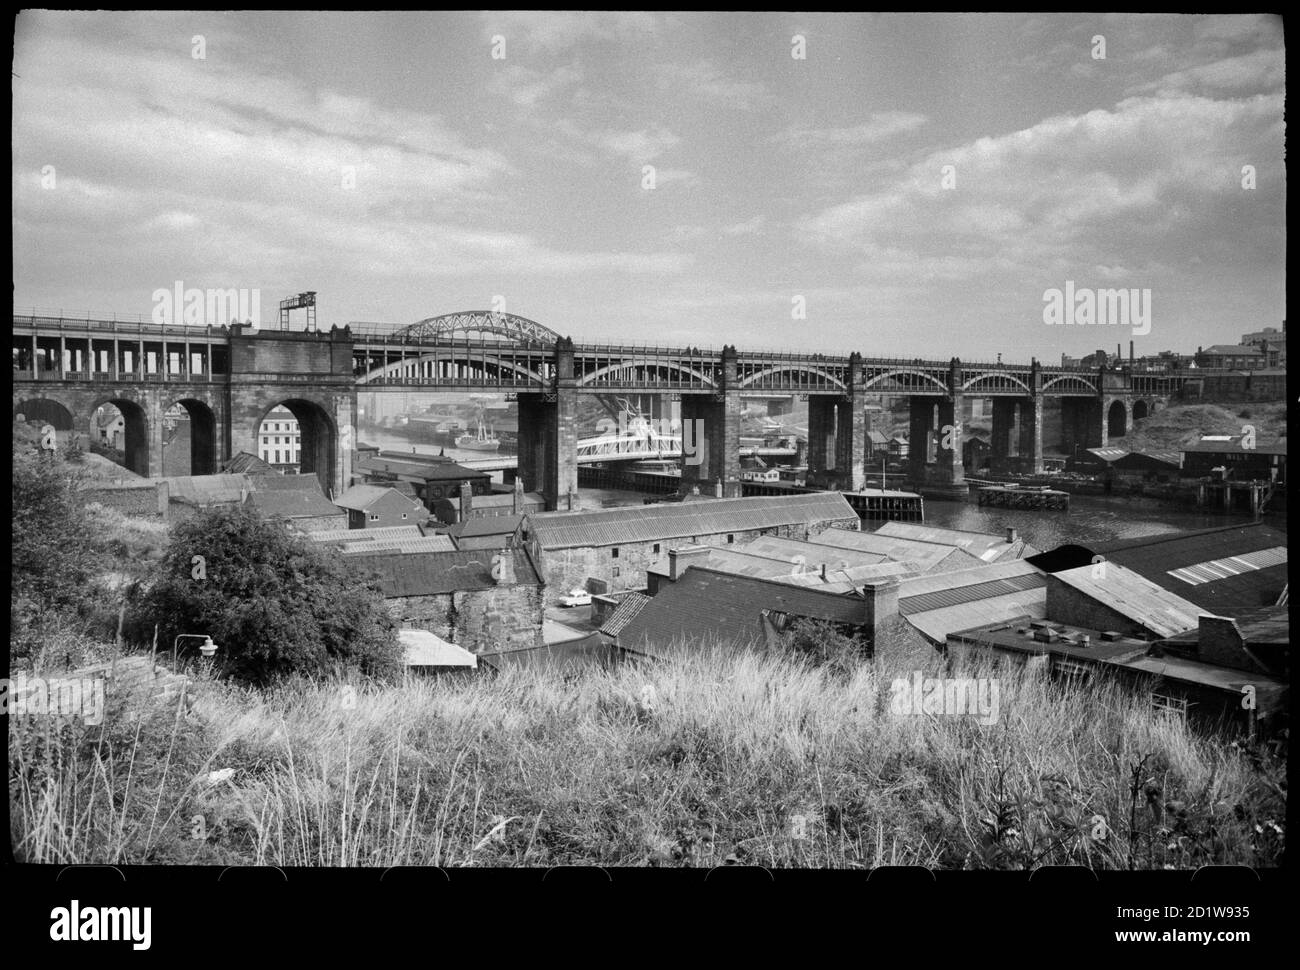 View of the High Level Bridge, a combined road and railway bridge, spanning the River Tyne, with domestic and industrial buildings in the foreground, and a view of the south bank of the river in the background, seen from north-west of the bridge, at a high vantage. Stock Photo